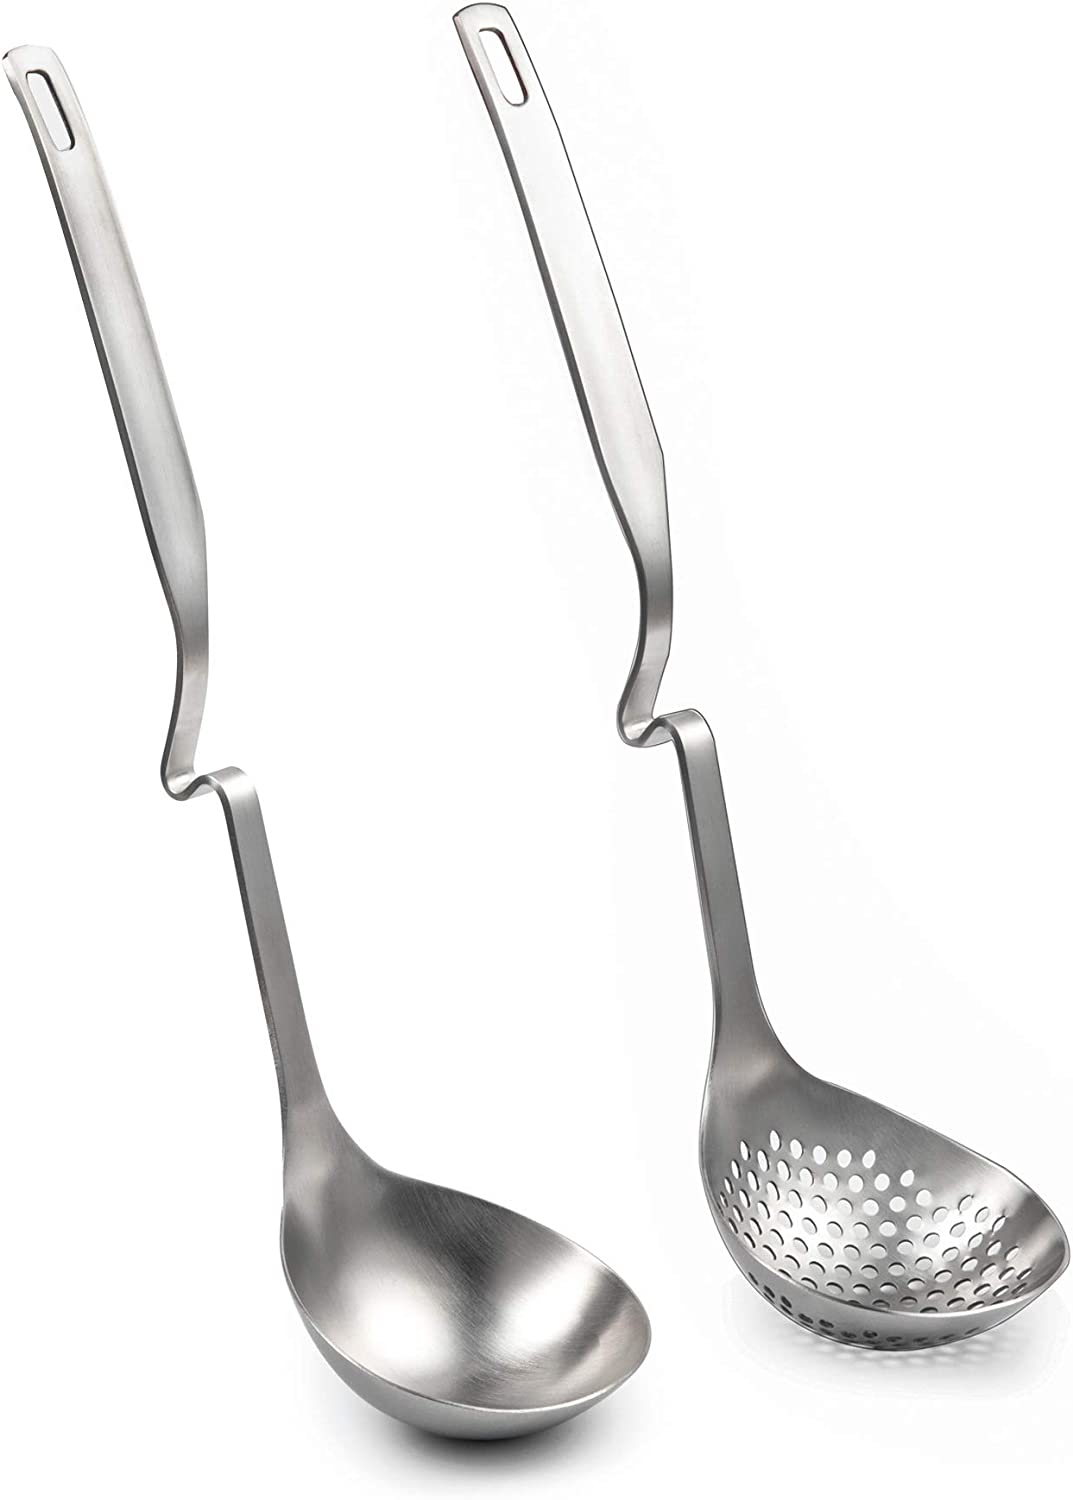 Large Soup Ladles Stainless Steel Ladle Kitchen Soup Ladles Cooking Soup Ladles Long Handle Ladles for Cooking Creative and Useful 